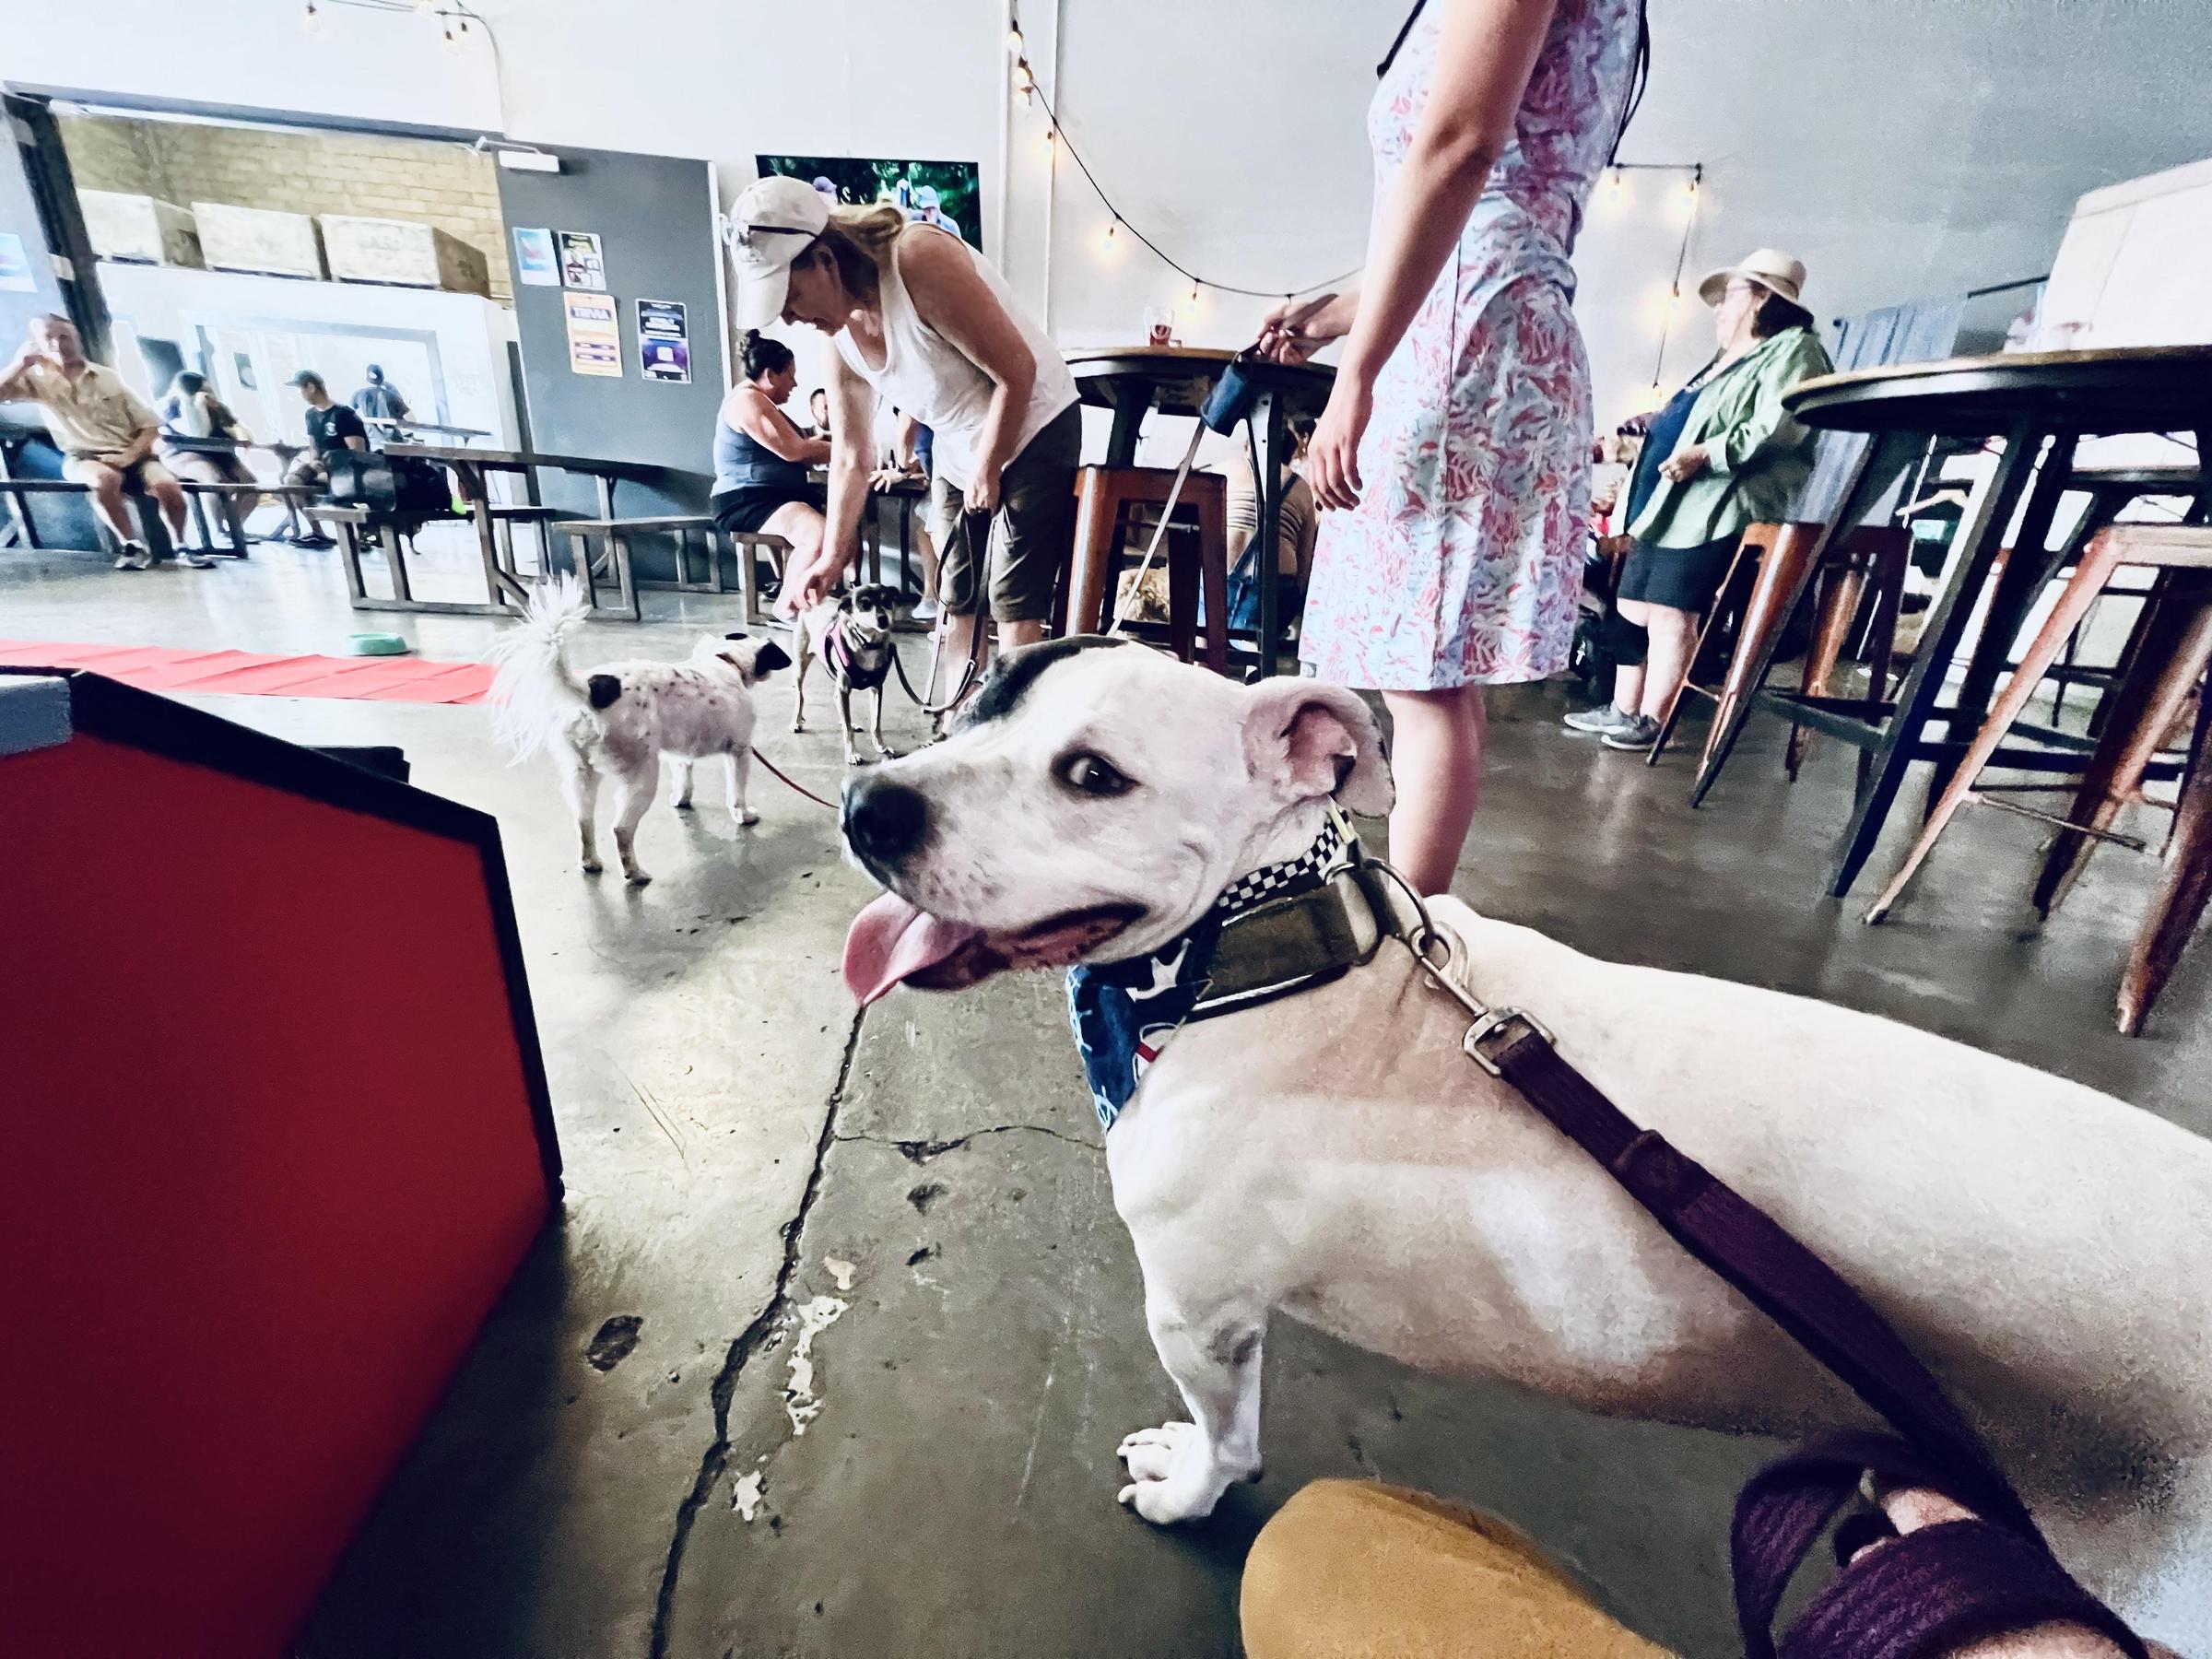 Pet Friendly Track 7 Brewing Company - Curtis Park